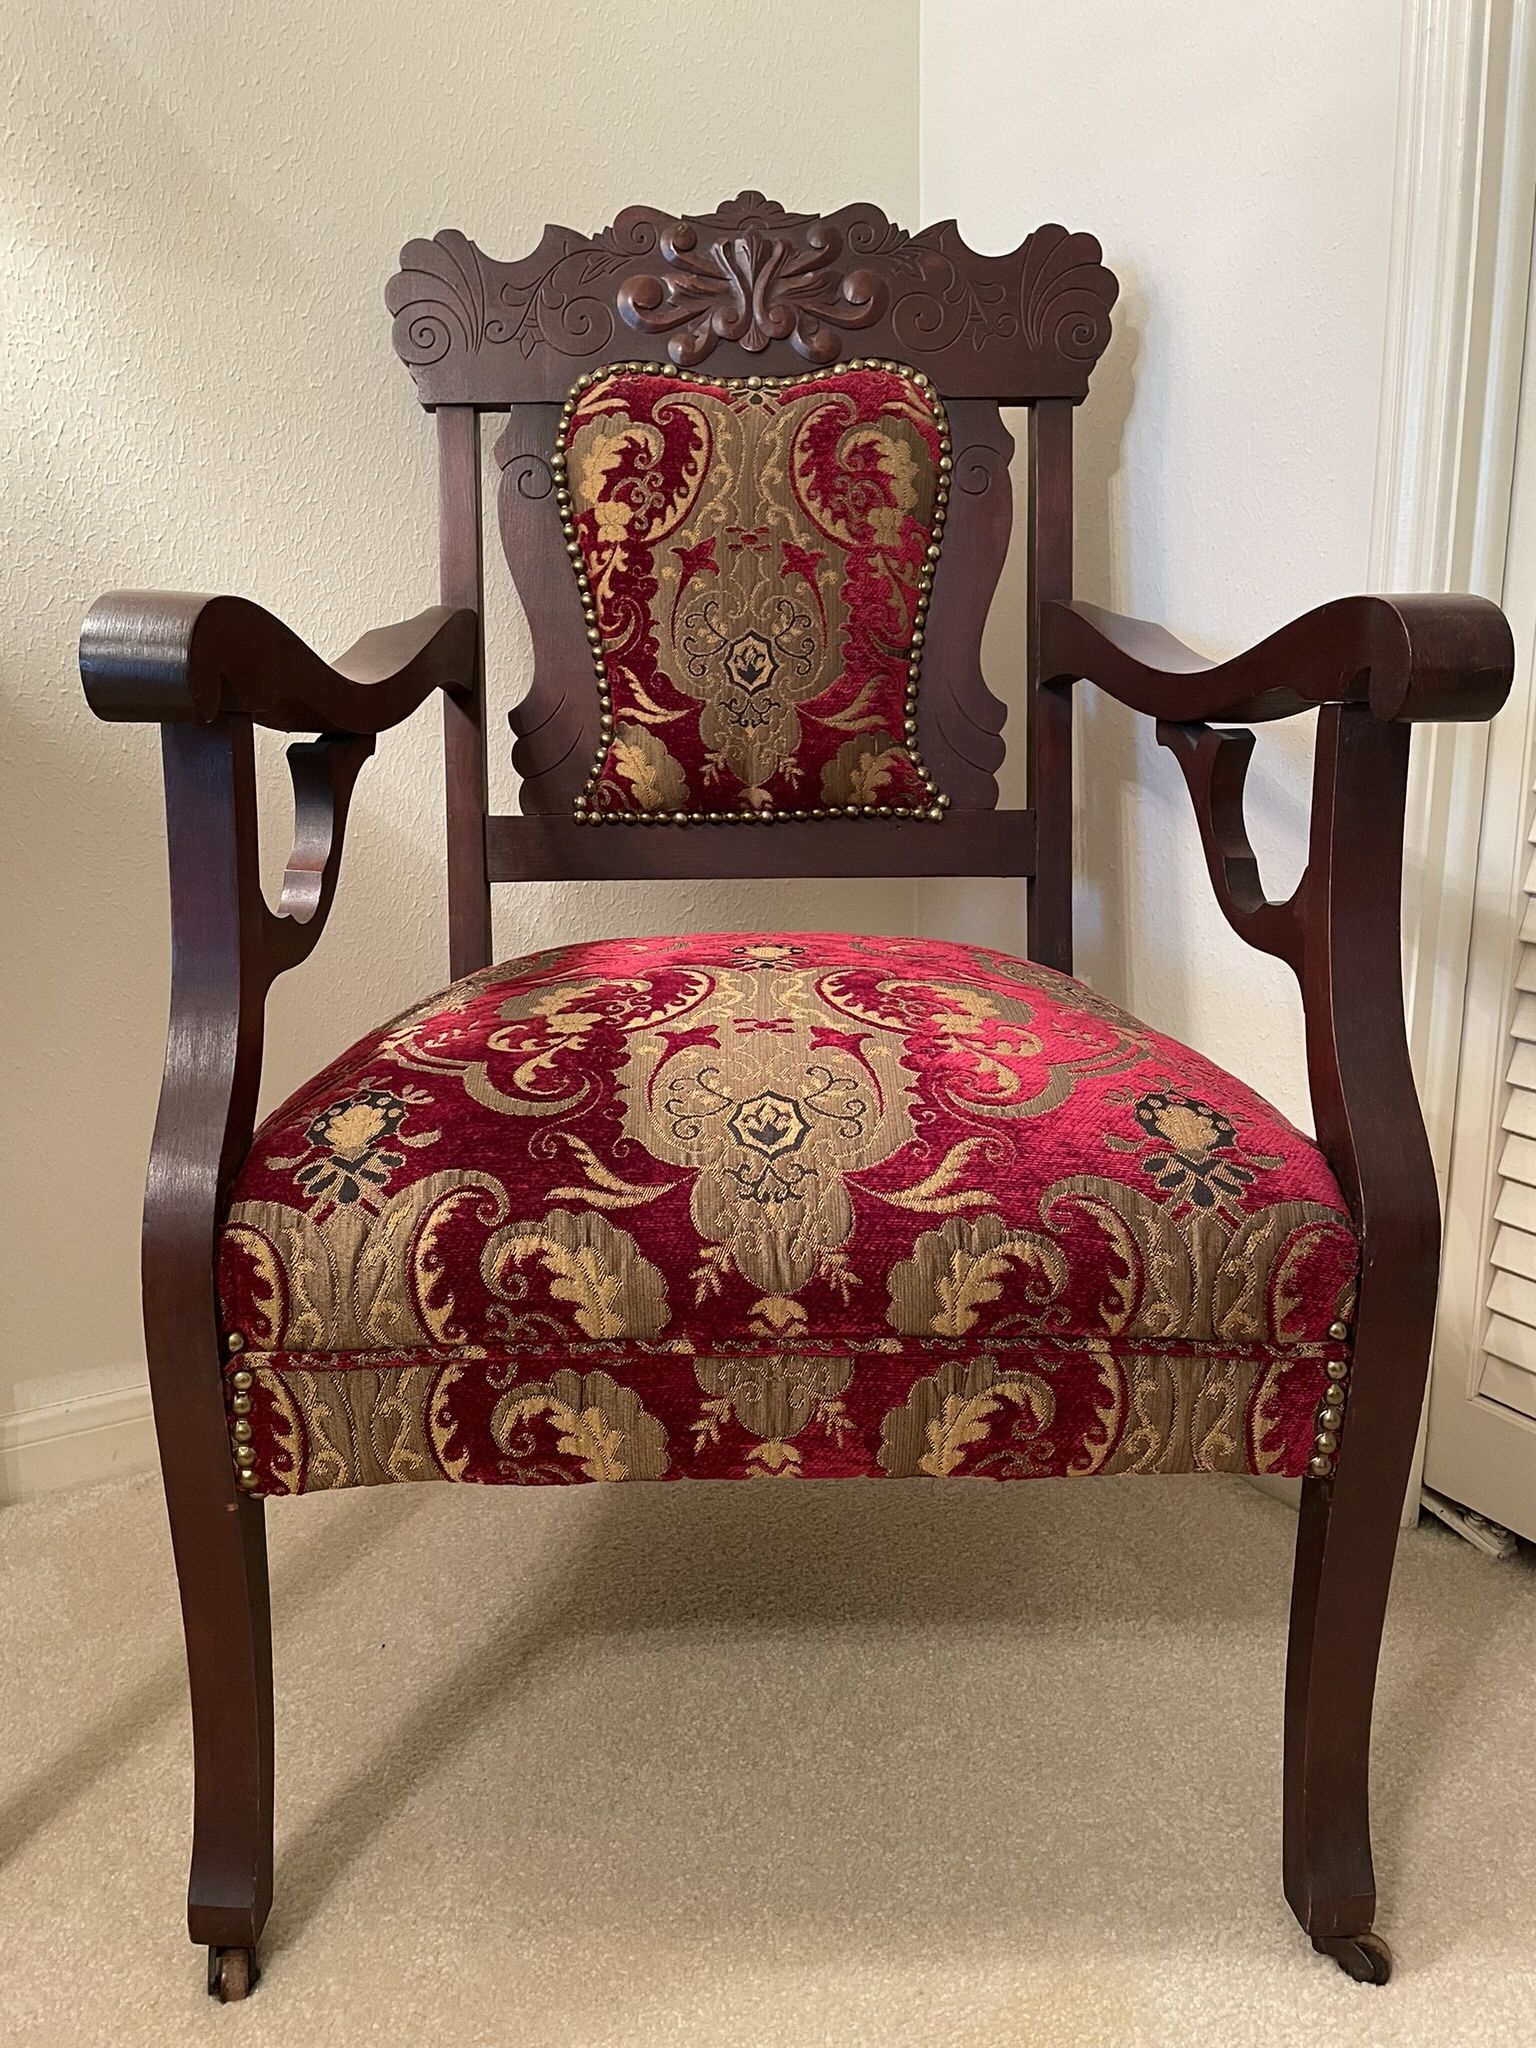 Antique Chair - Matching Settee Has Also Been Listed! Settee Or Loveseat Pictured Here Also